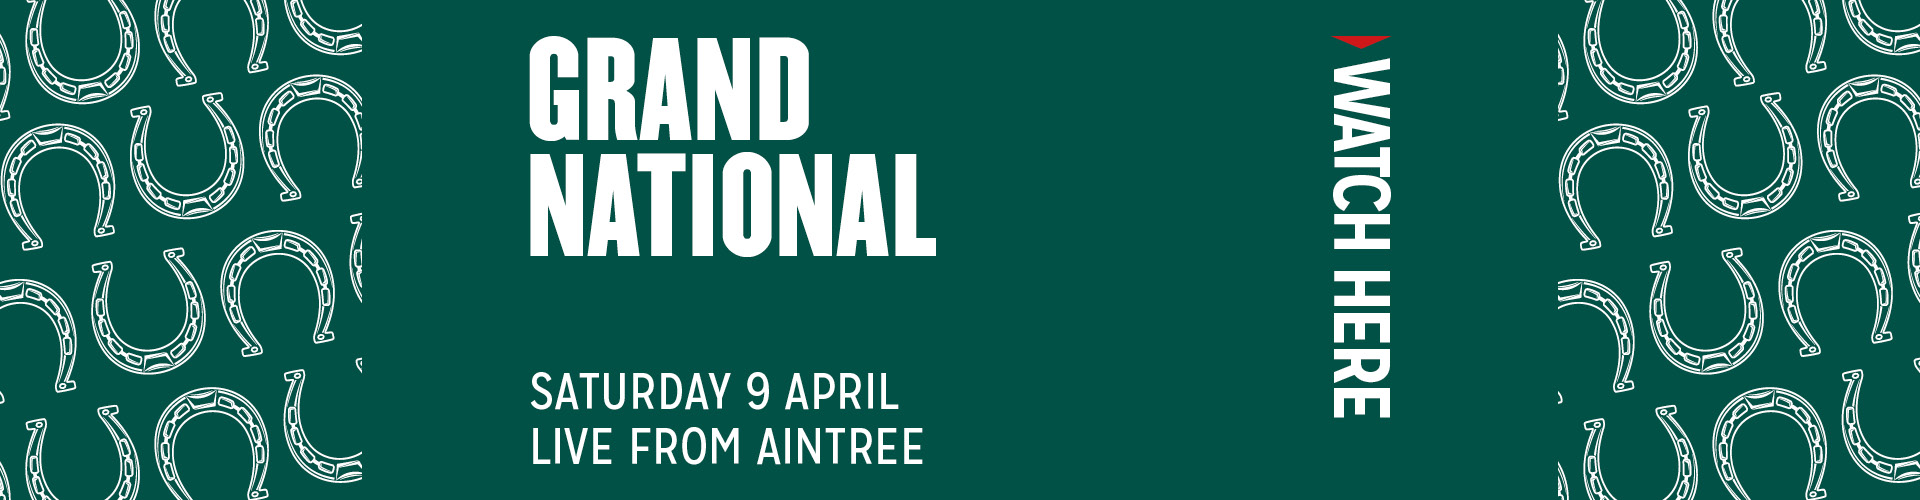 Grand National, Saturday 9th April, LIVE here